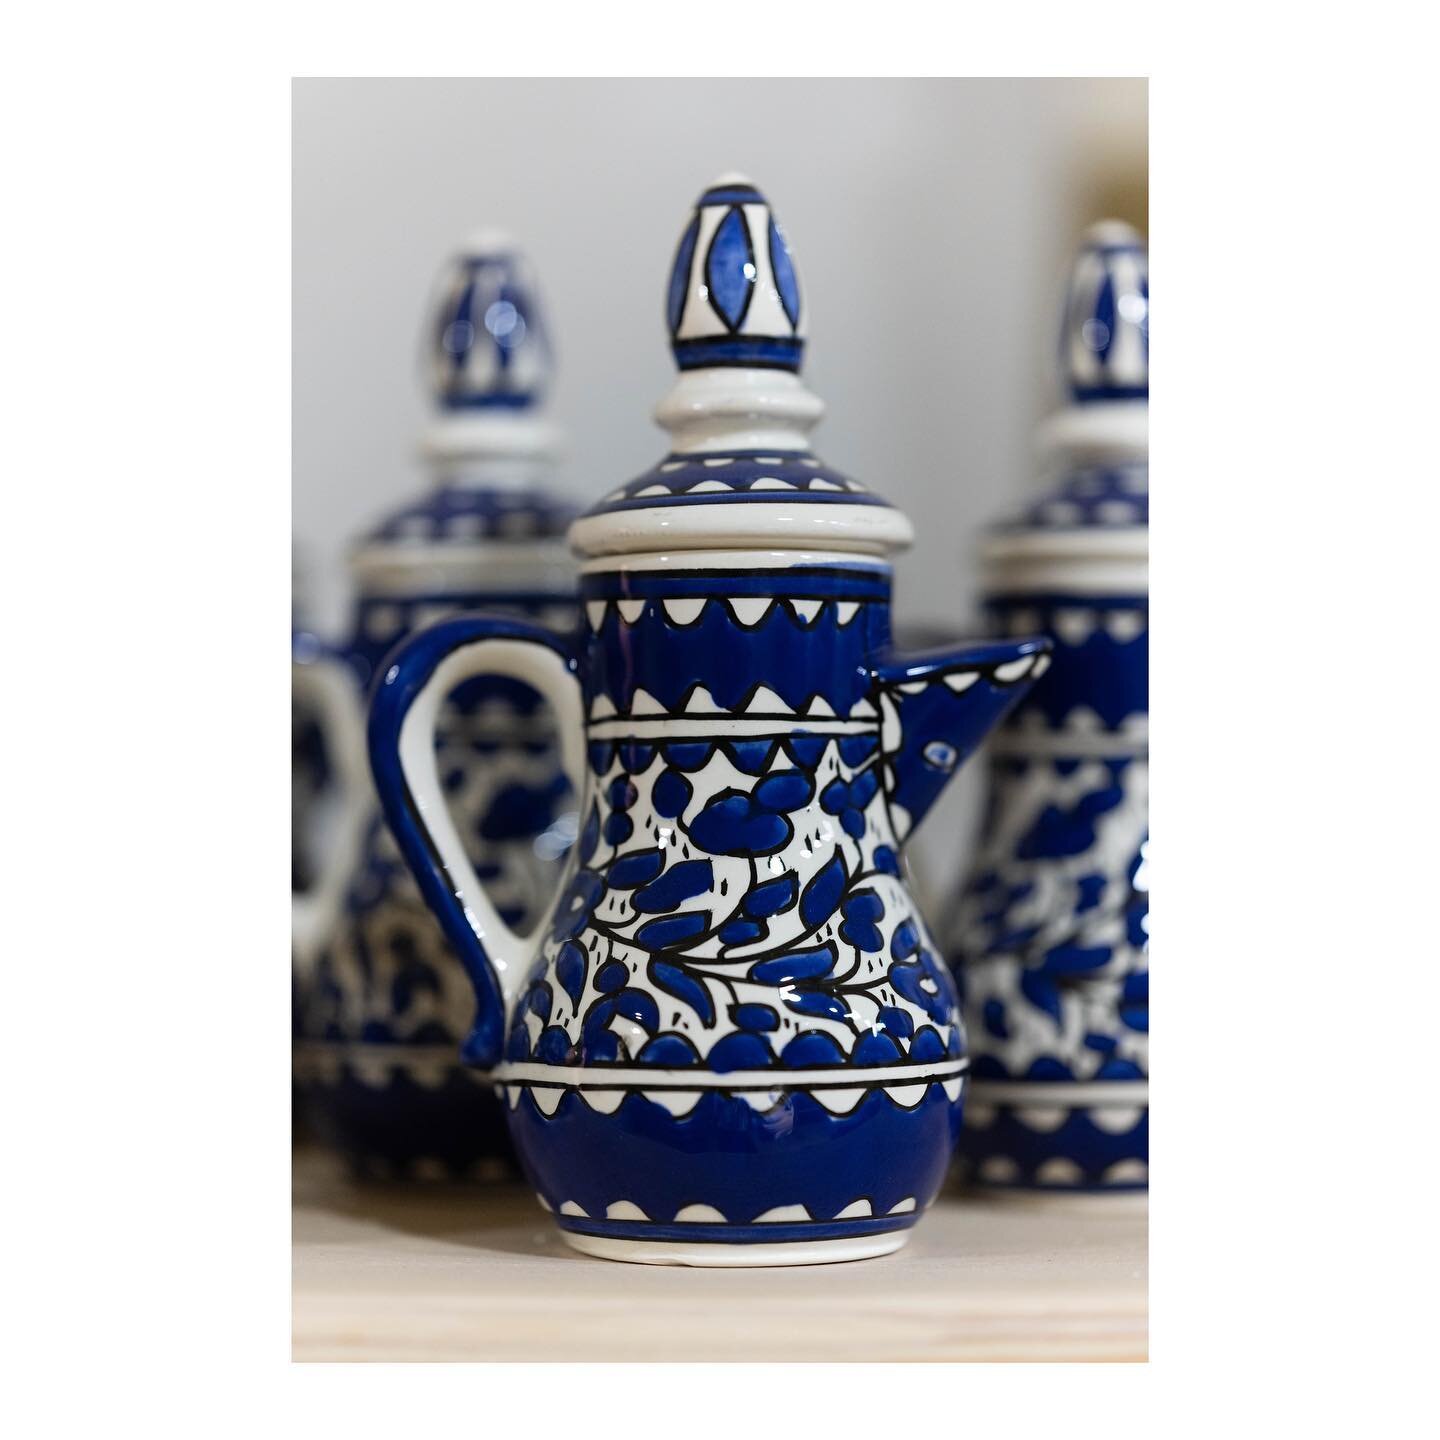 A closer look at these beautiful blue and white ceramics from Hebron, Palestine. Available for export via @craft_village2017